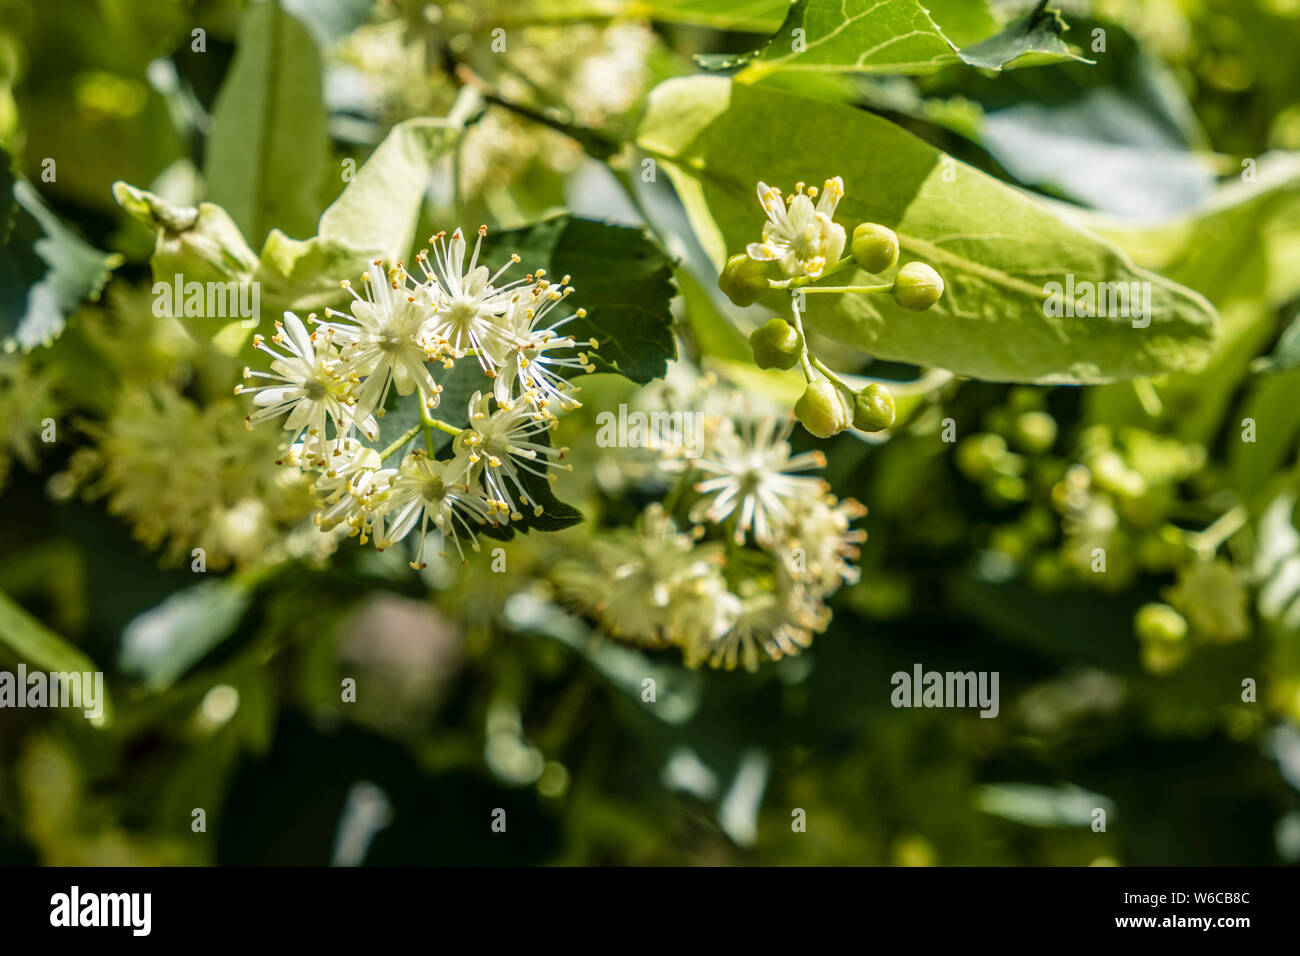 Blossoms of a Large-leaved Linden (Tilia platyphyllos) in full bloom Stock Photo